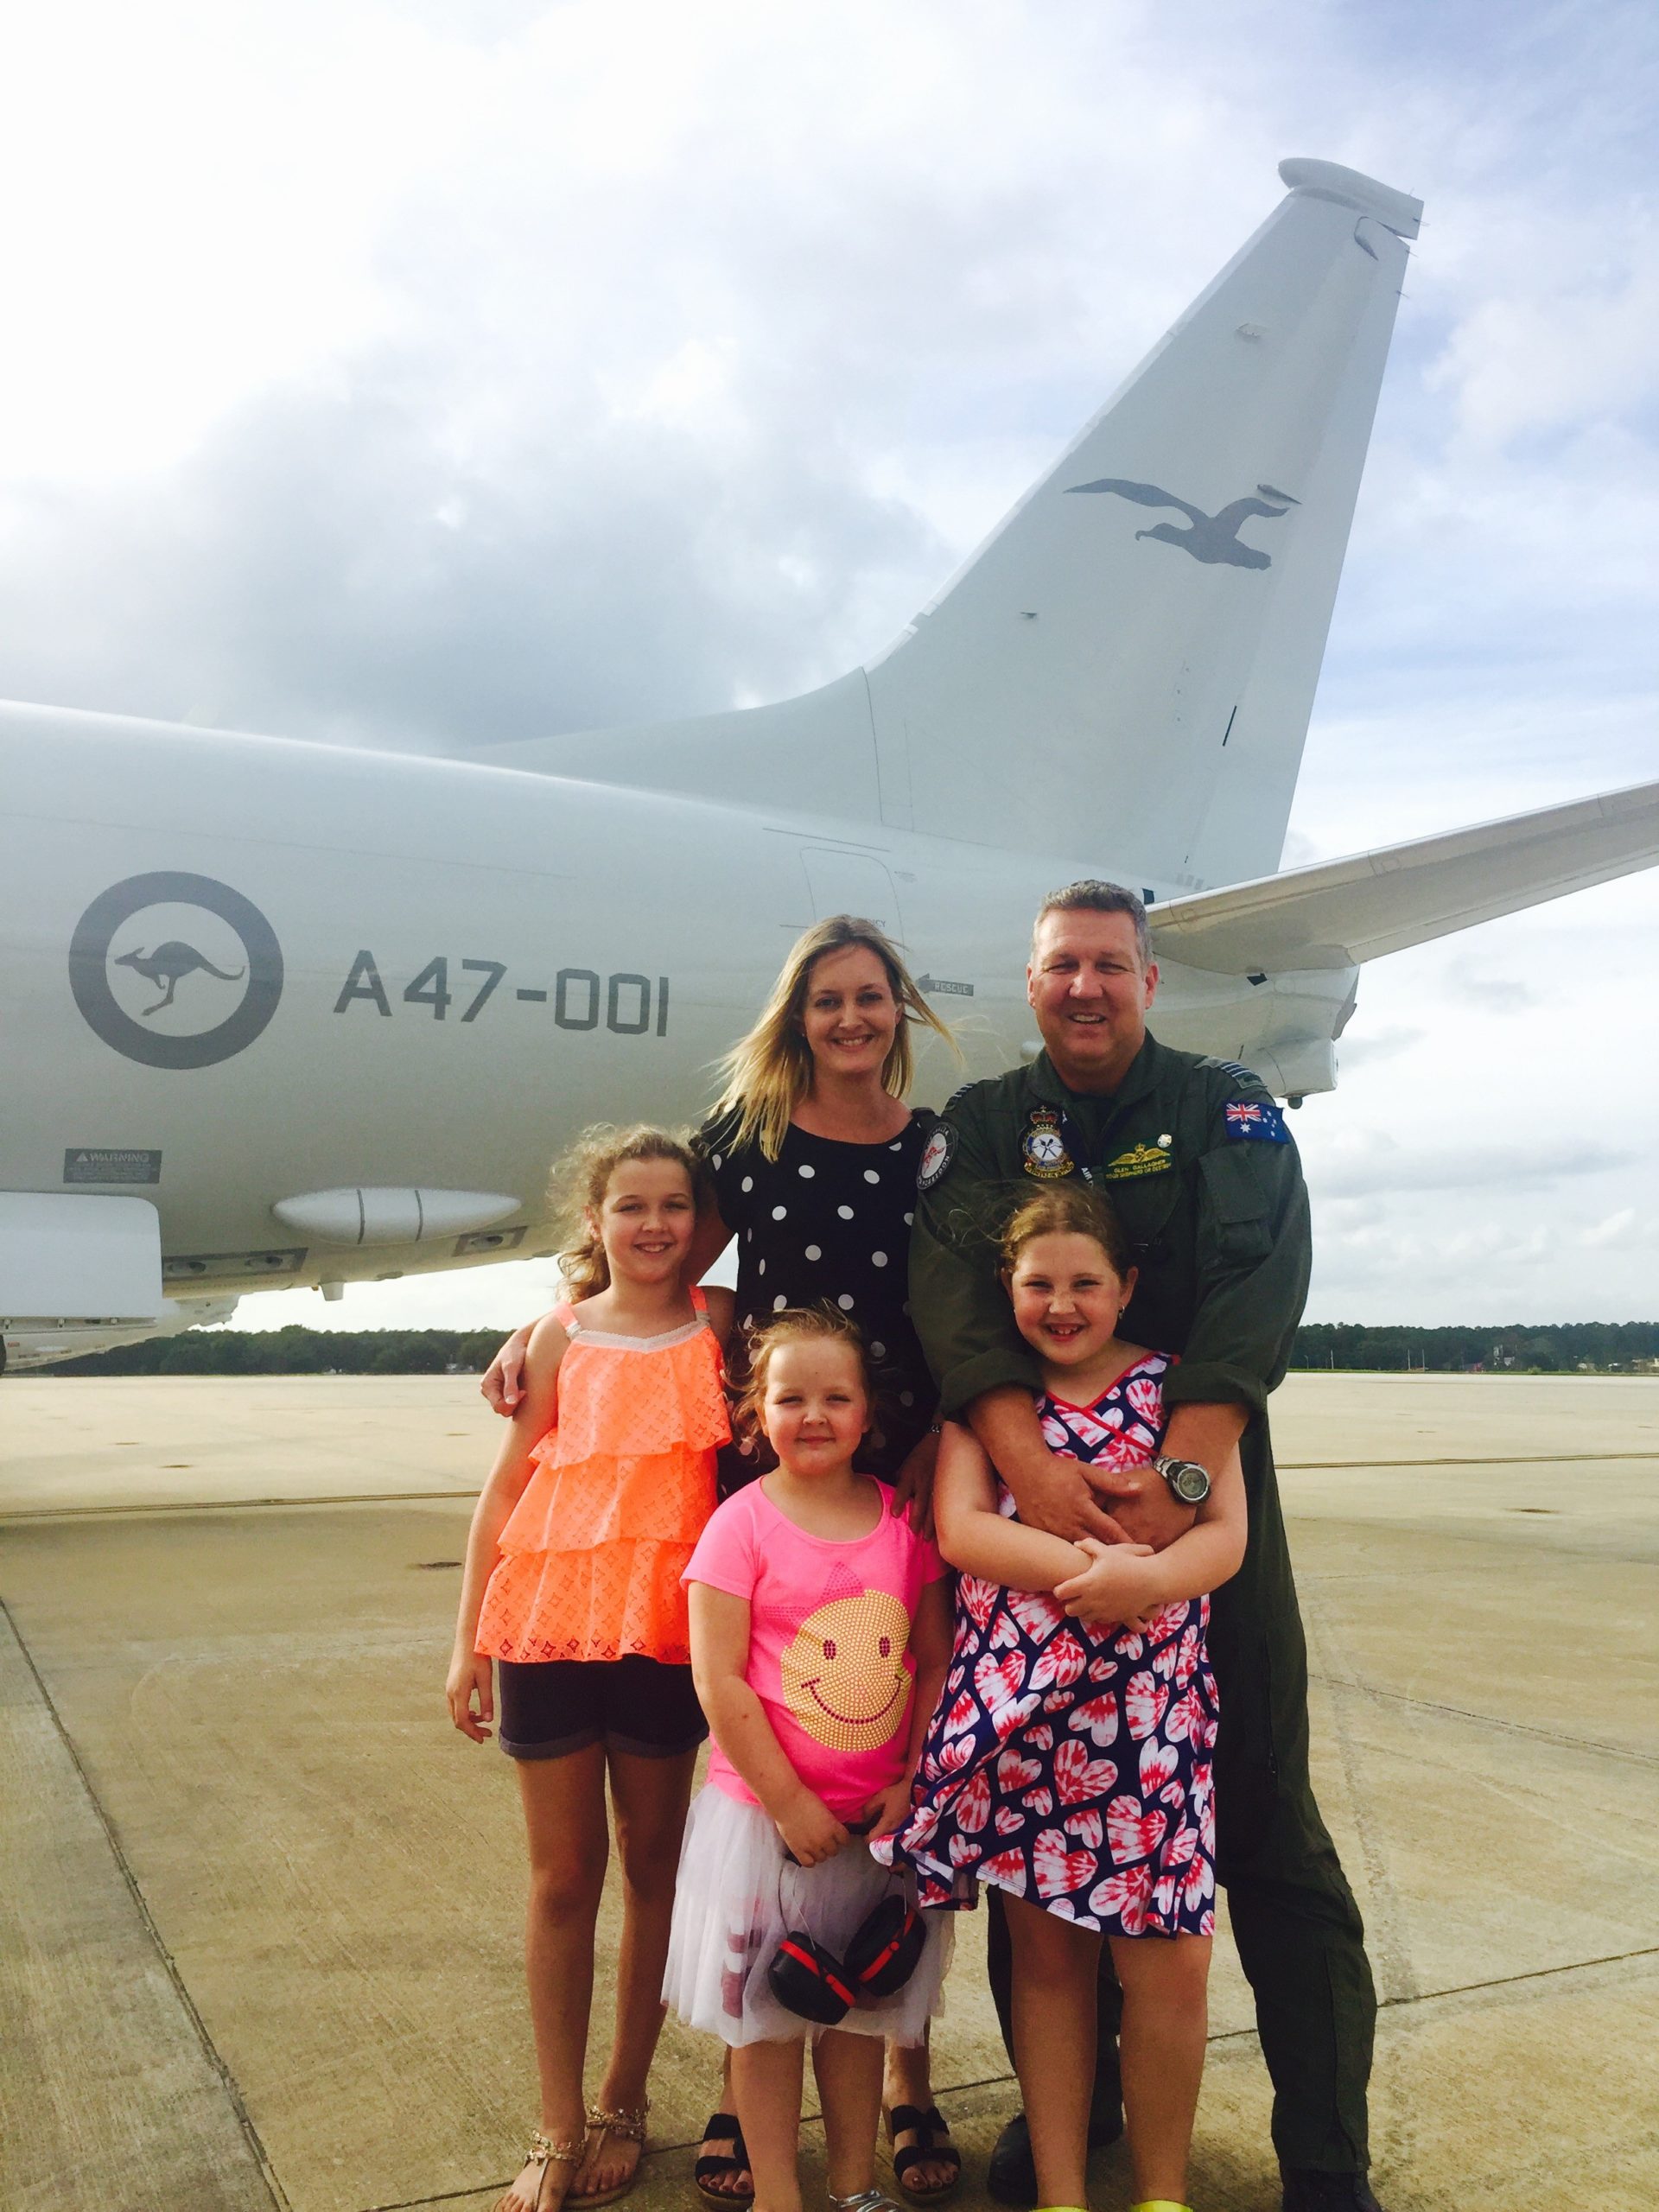 Glen Gallagher and family in front of a military aircraft